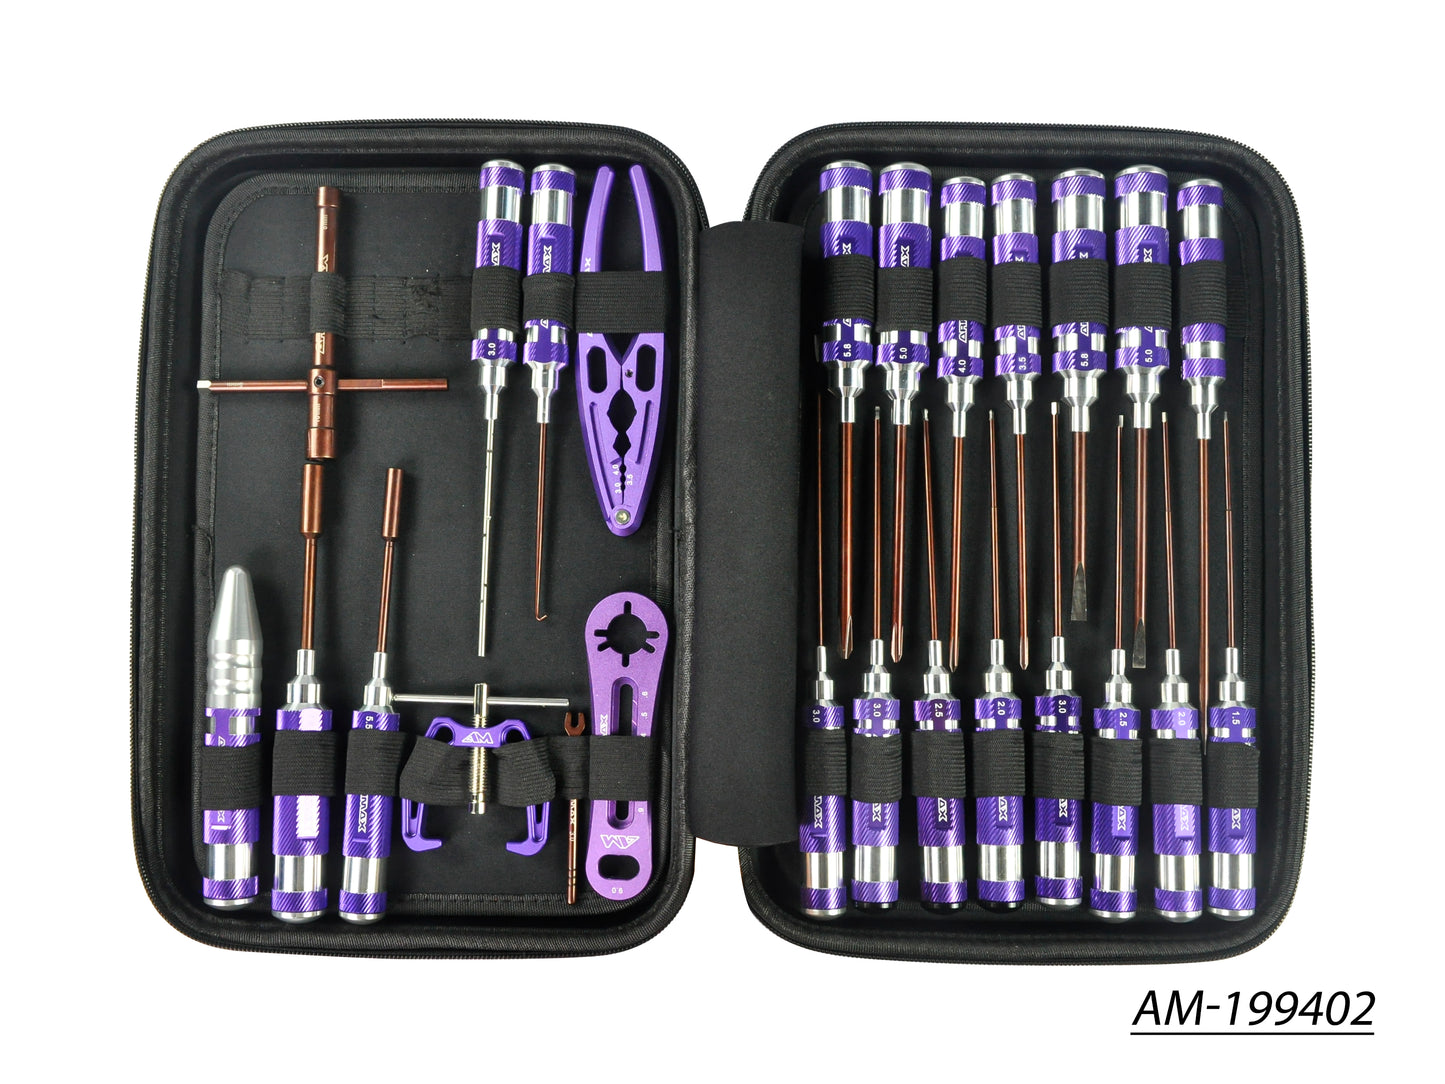 AM Toolset For On-Road (25Pcs) With Tools Bag (AM-199402)